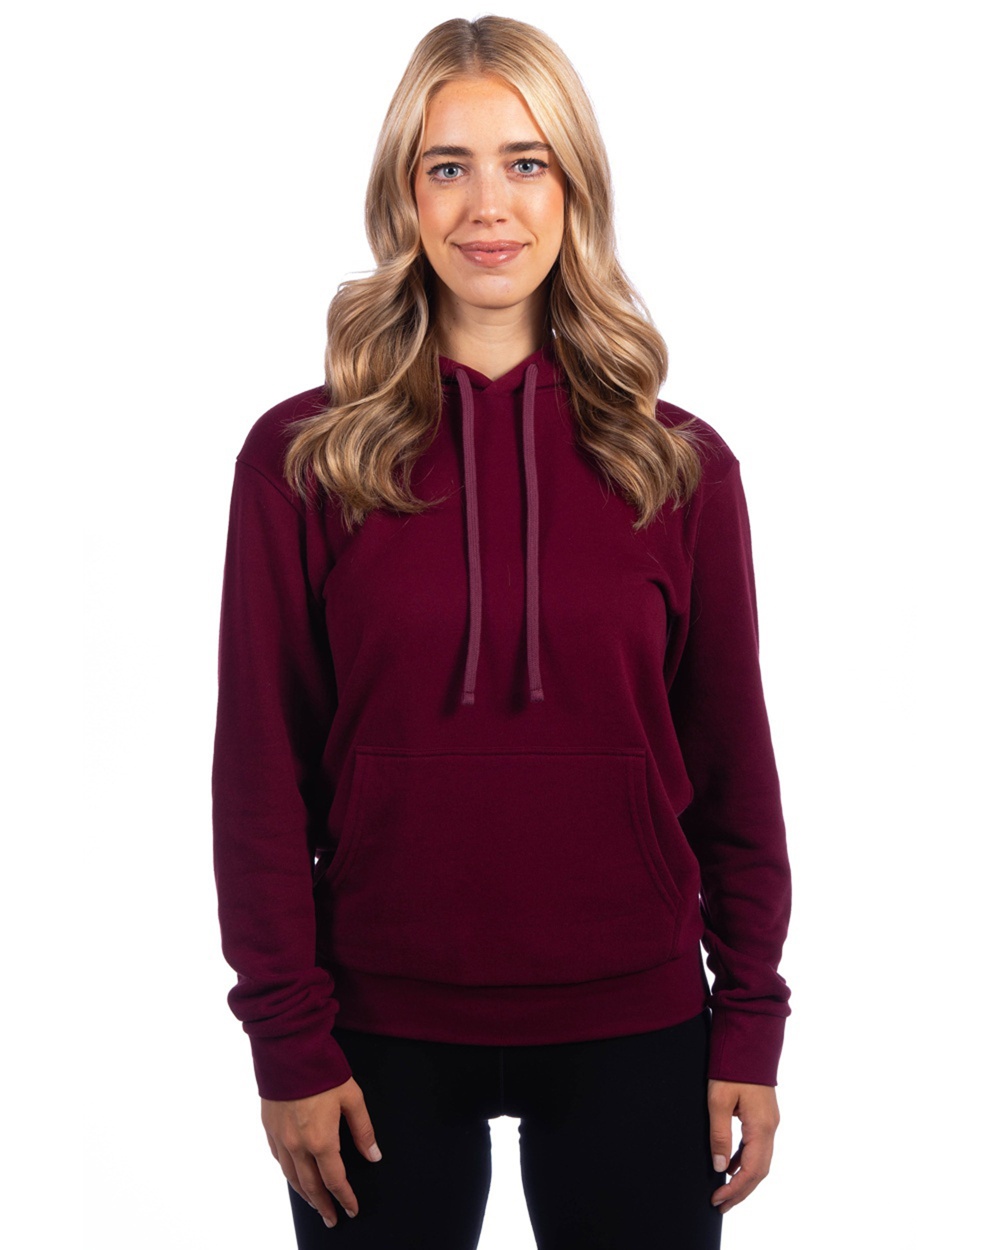 Next Level 9384 Ladies' Cropped Pullover Hooded Sweatshirt 